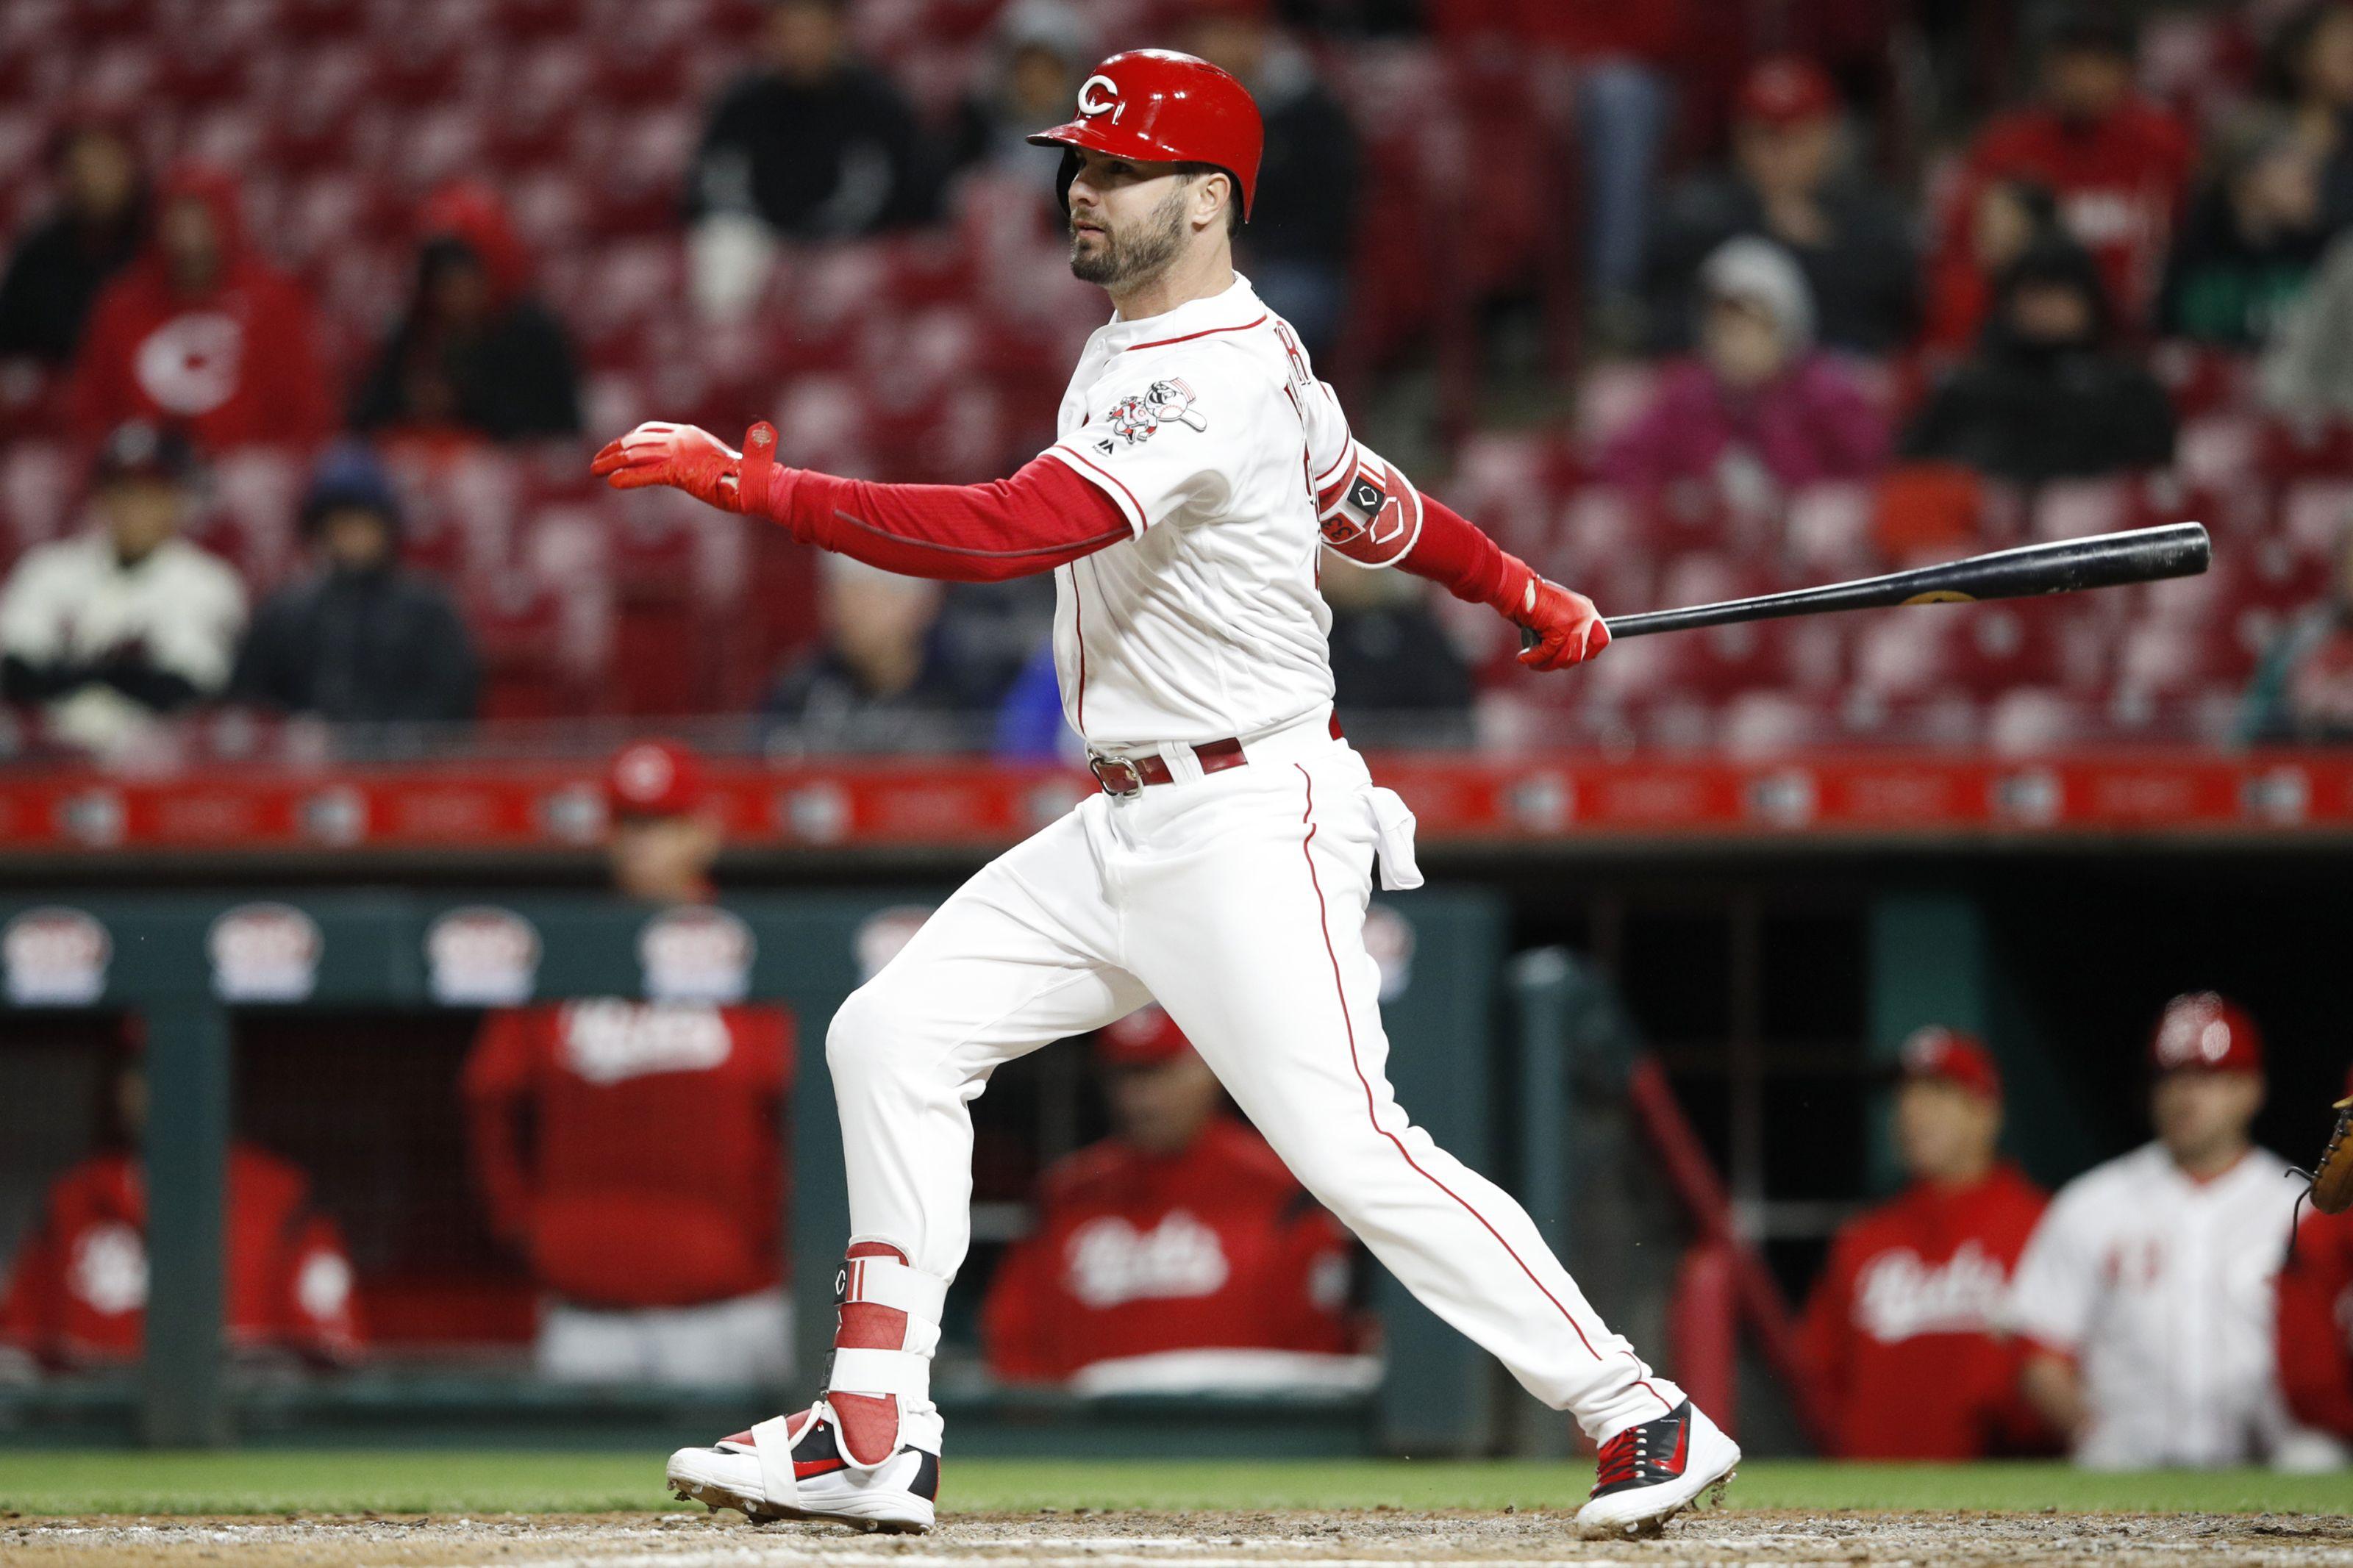 Cincinnati Reds: Where does Jesse Winker fit in next year's lineup?